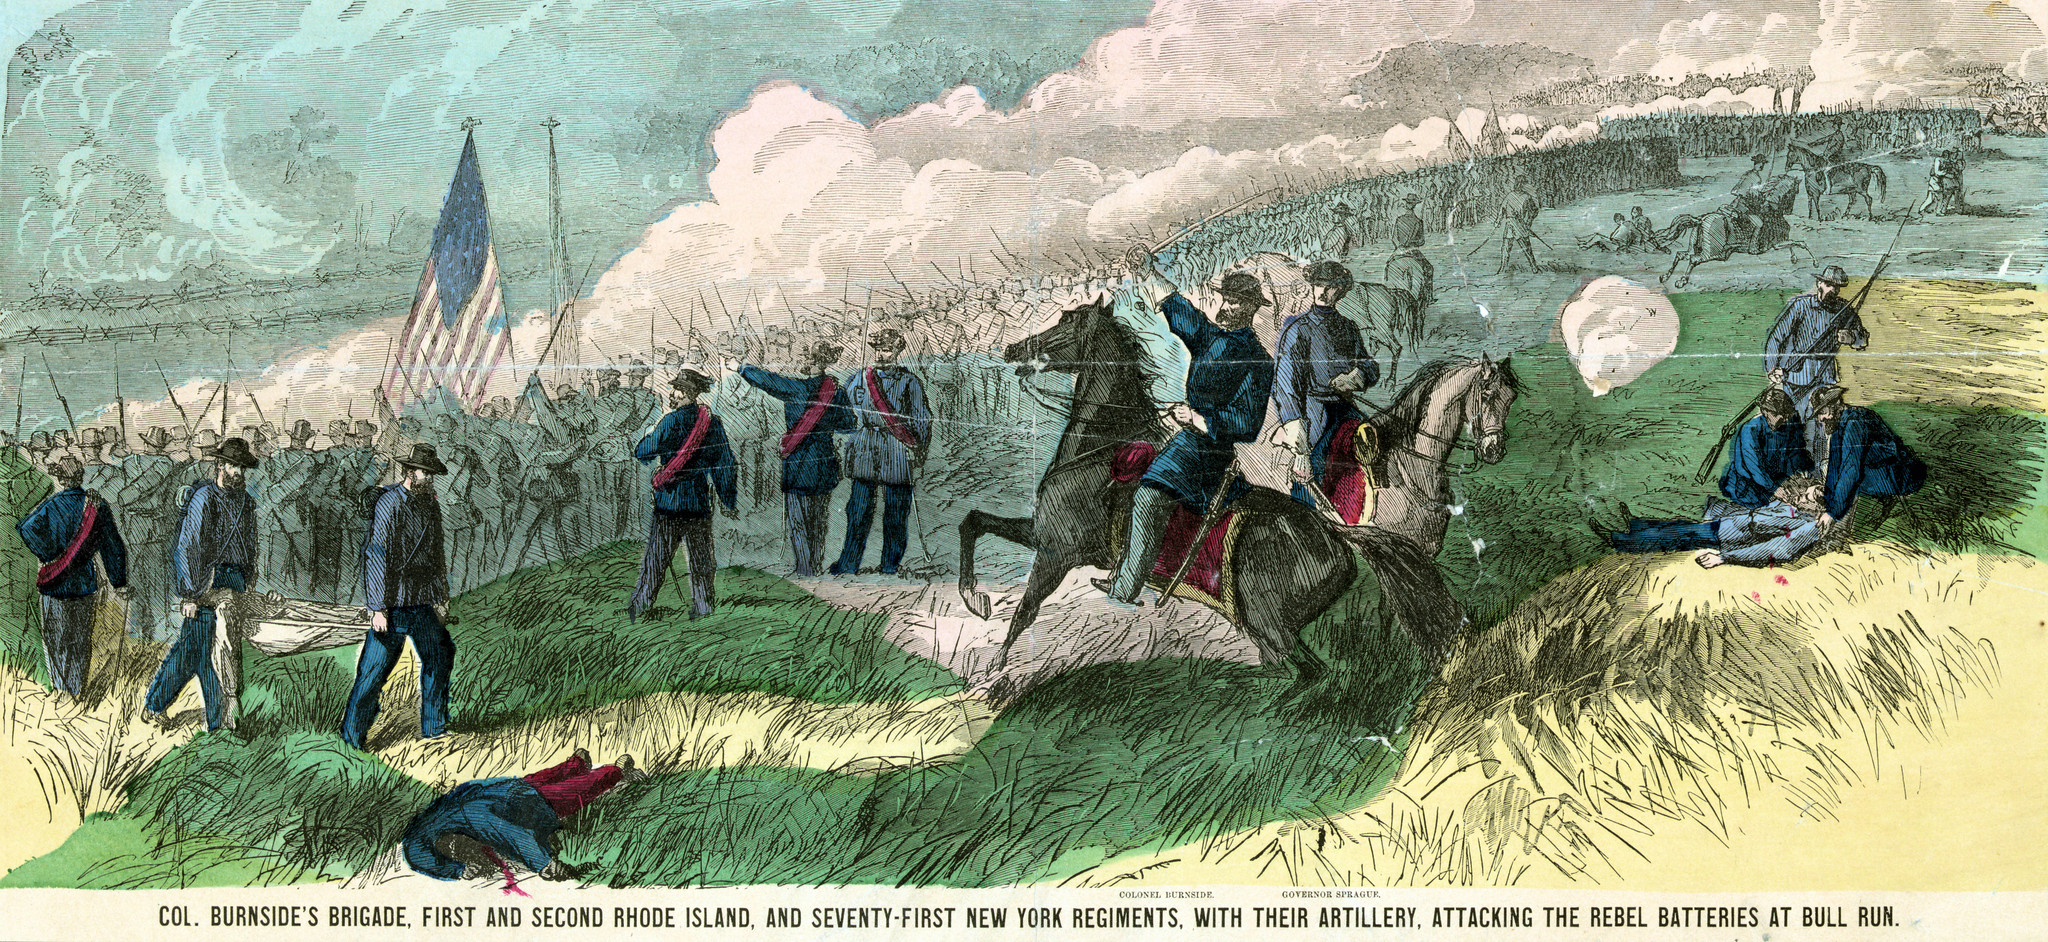 Col Burnside's Brigade, First and Second Rhode Island, and Seventy-first New York Regiments, with their artillery, attacking the rebel batteries at Bull Run